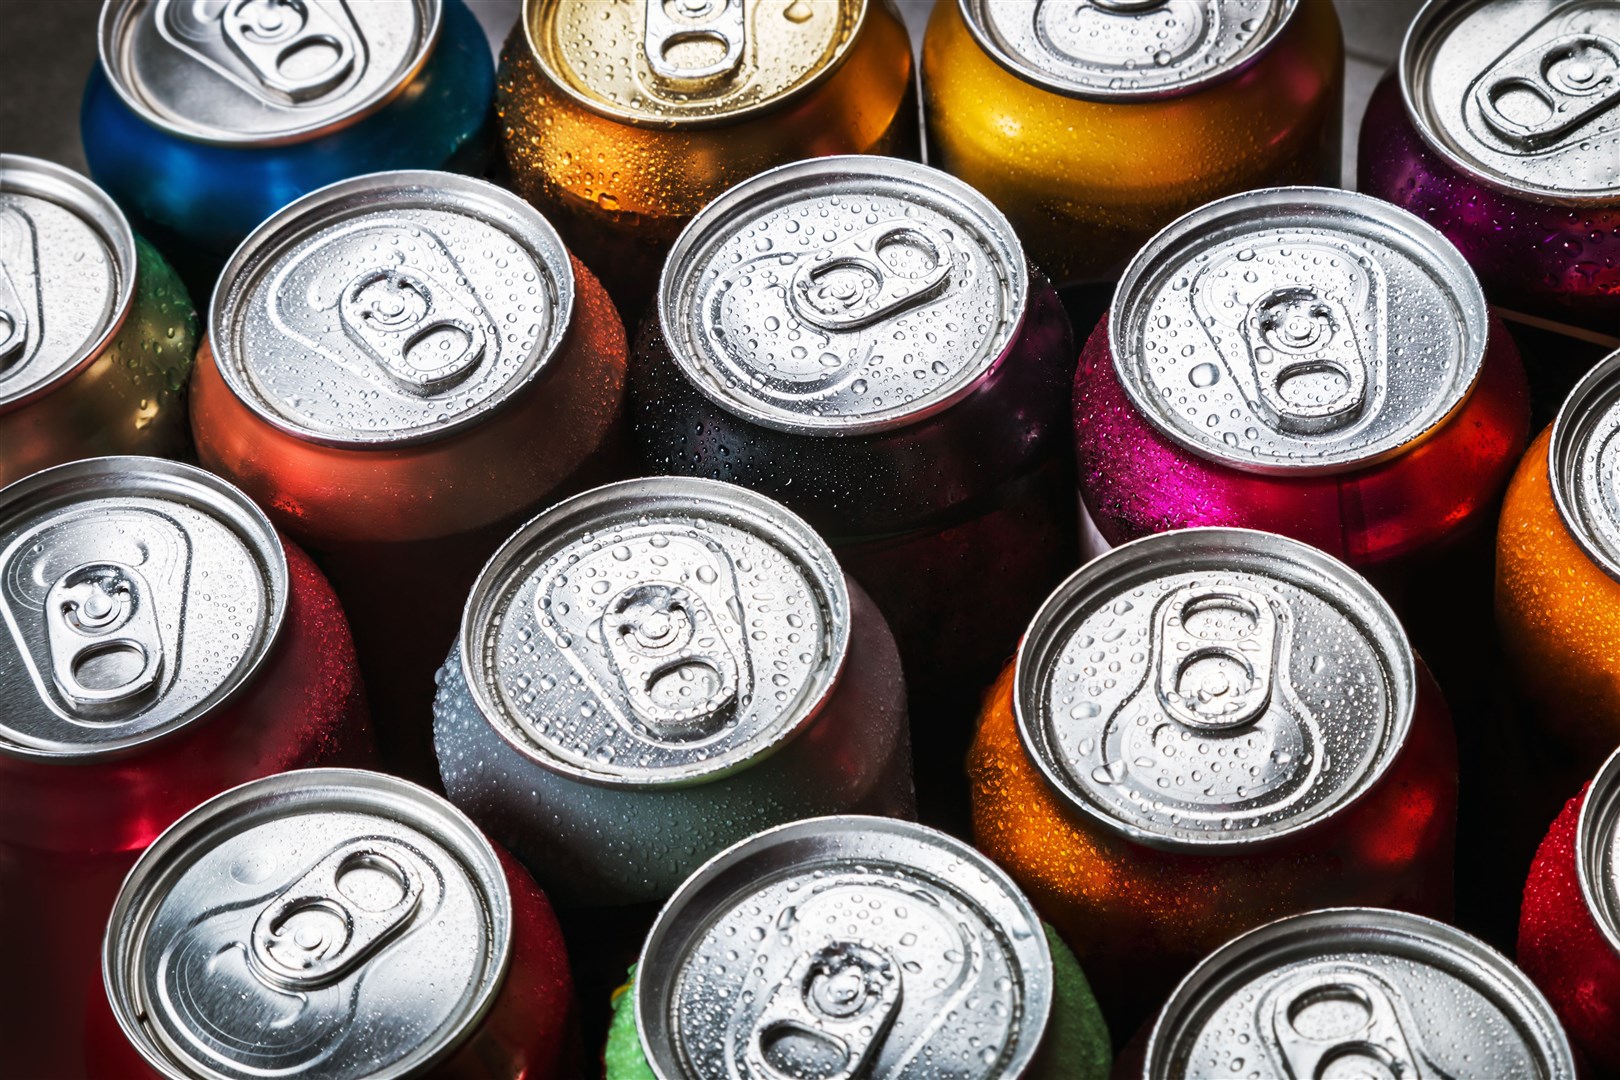 Aluminum cans will form part of the wider recycling scheme.